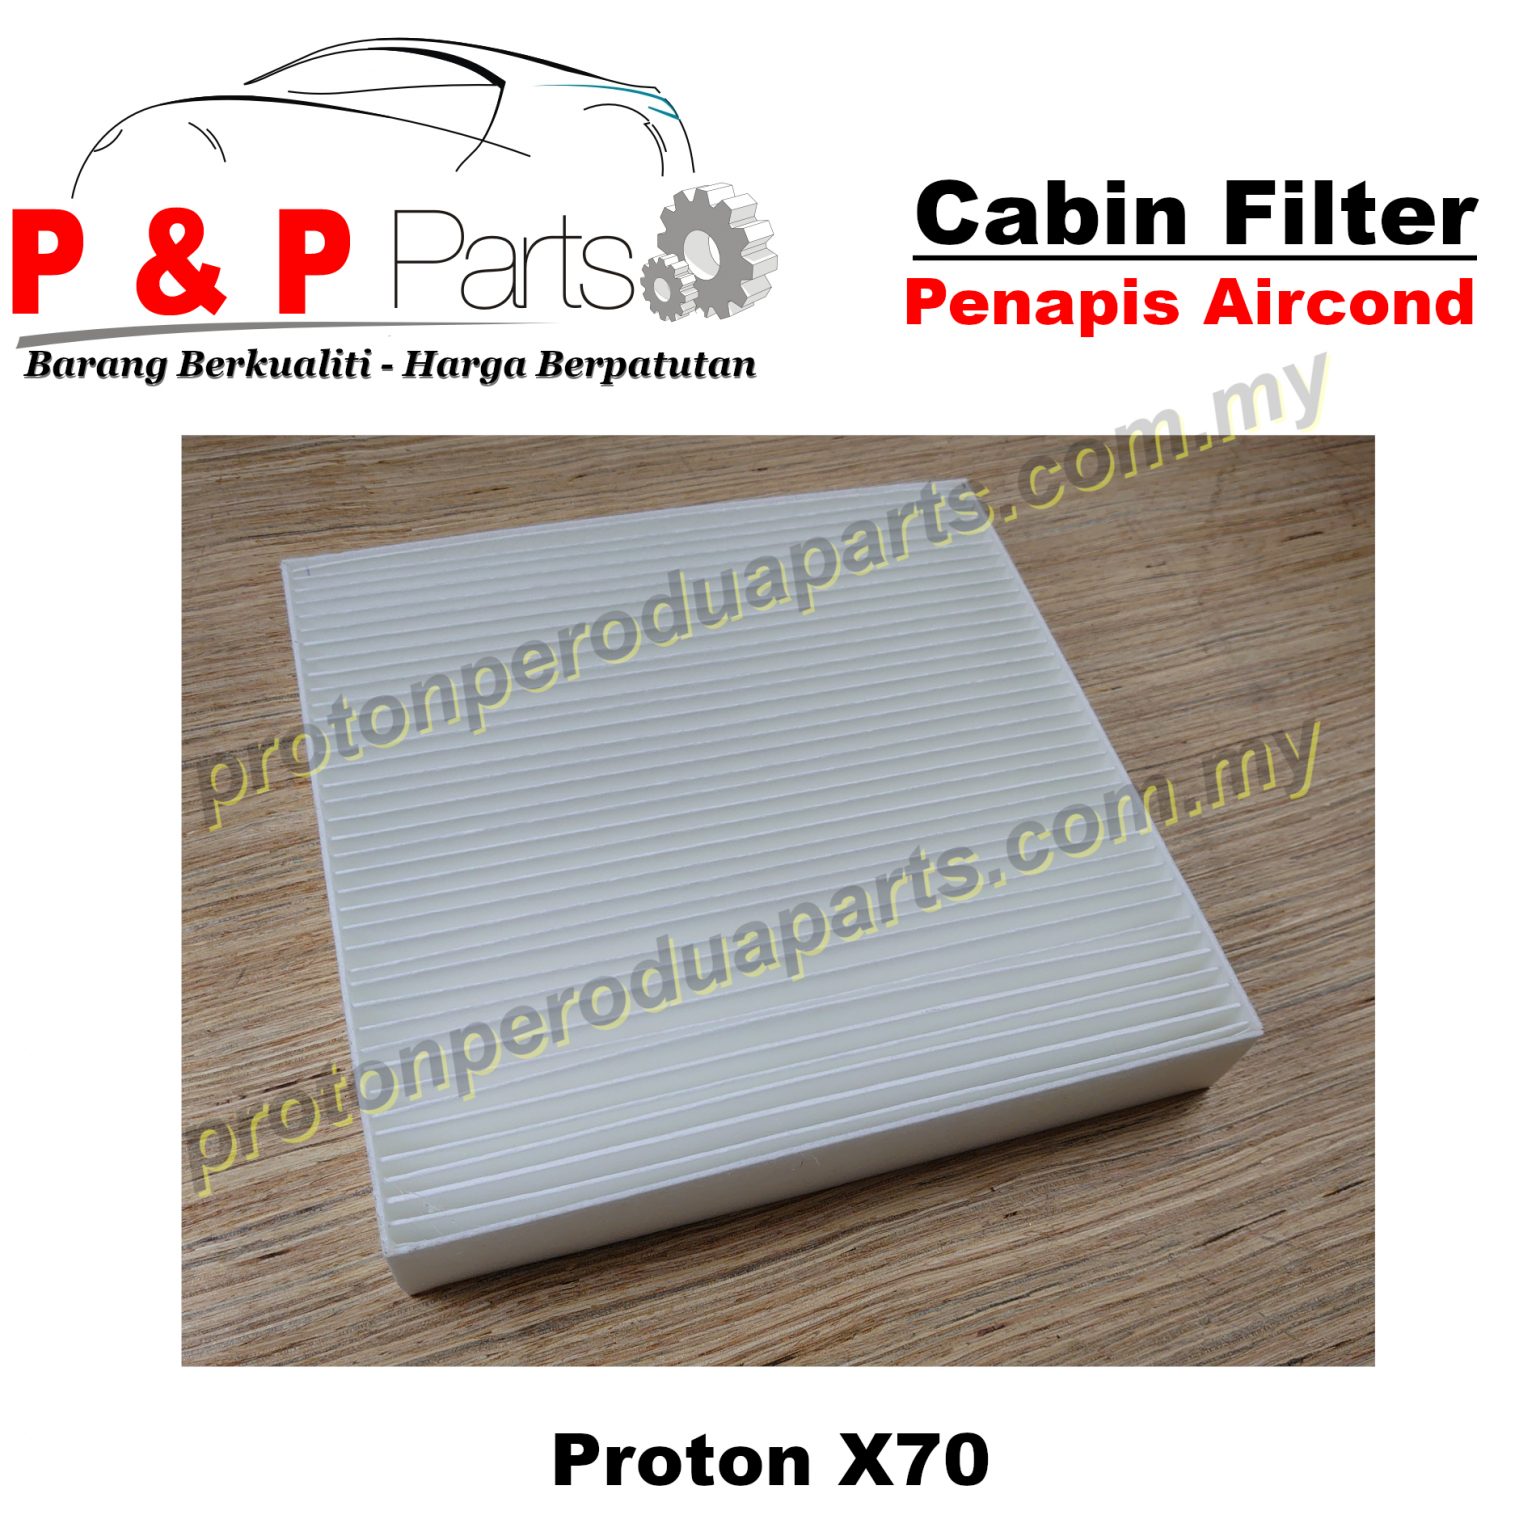 Cabin Air Conditioner Penapis Aircond Filter  Proton X70 Geely Boyue